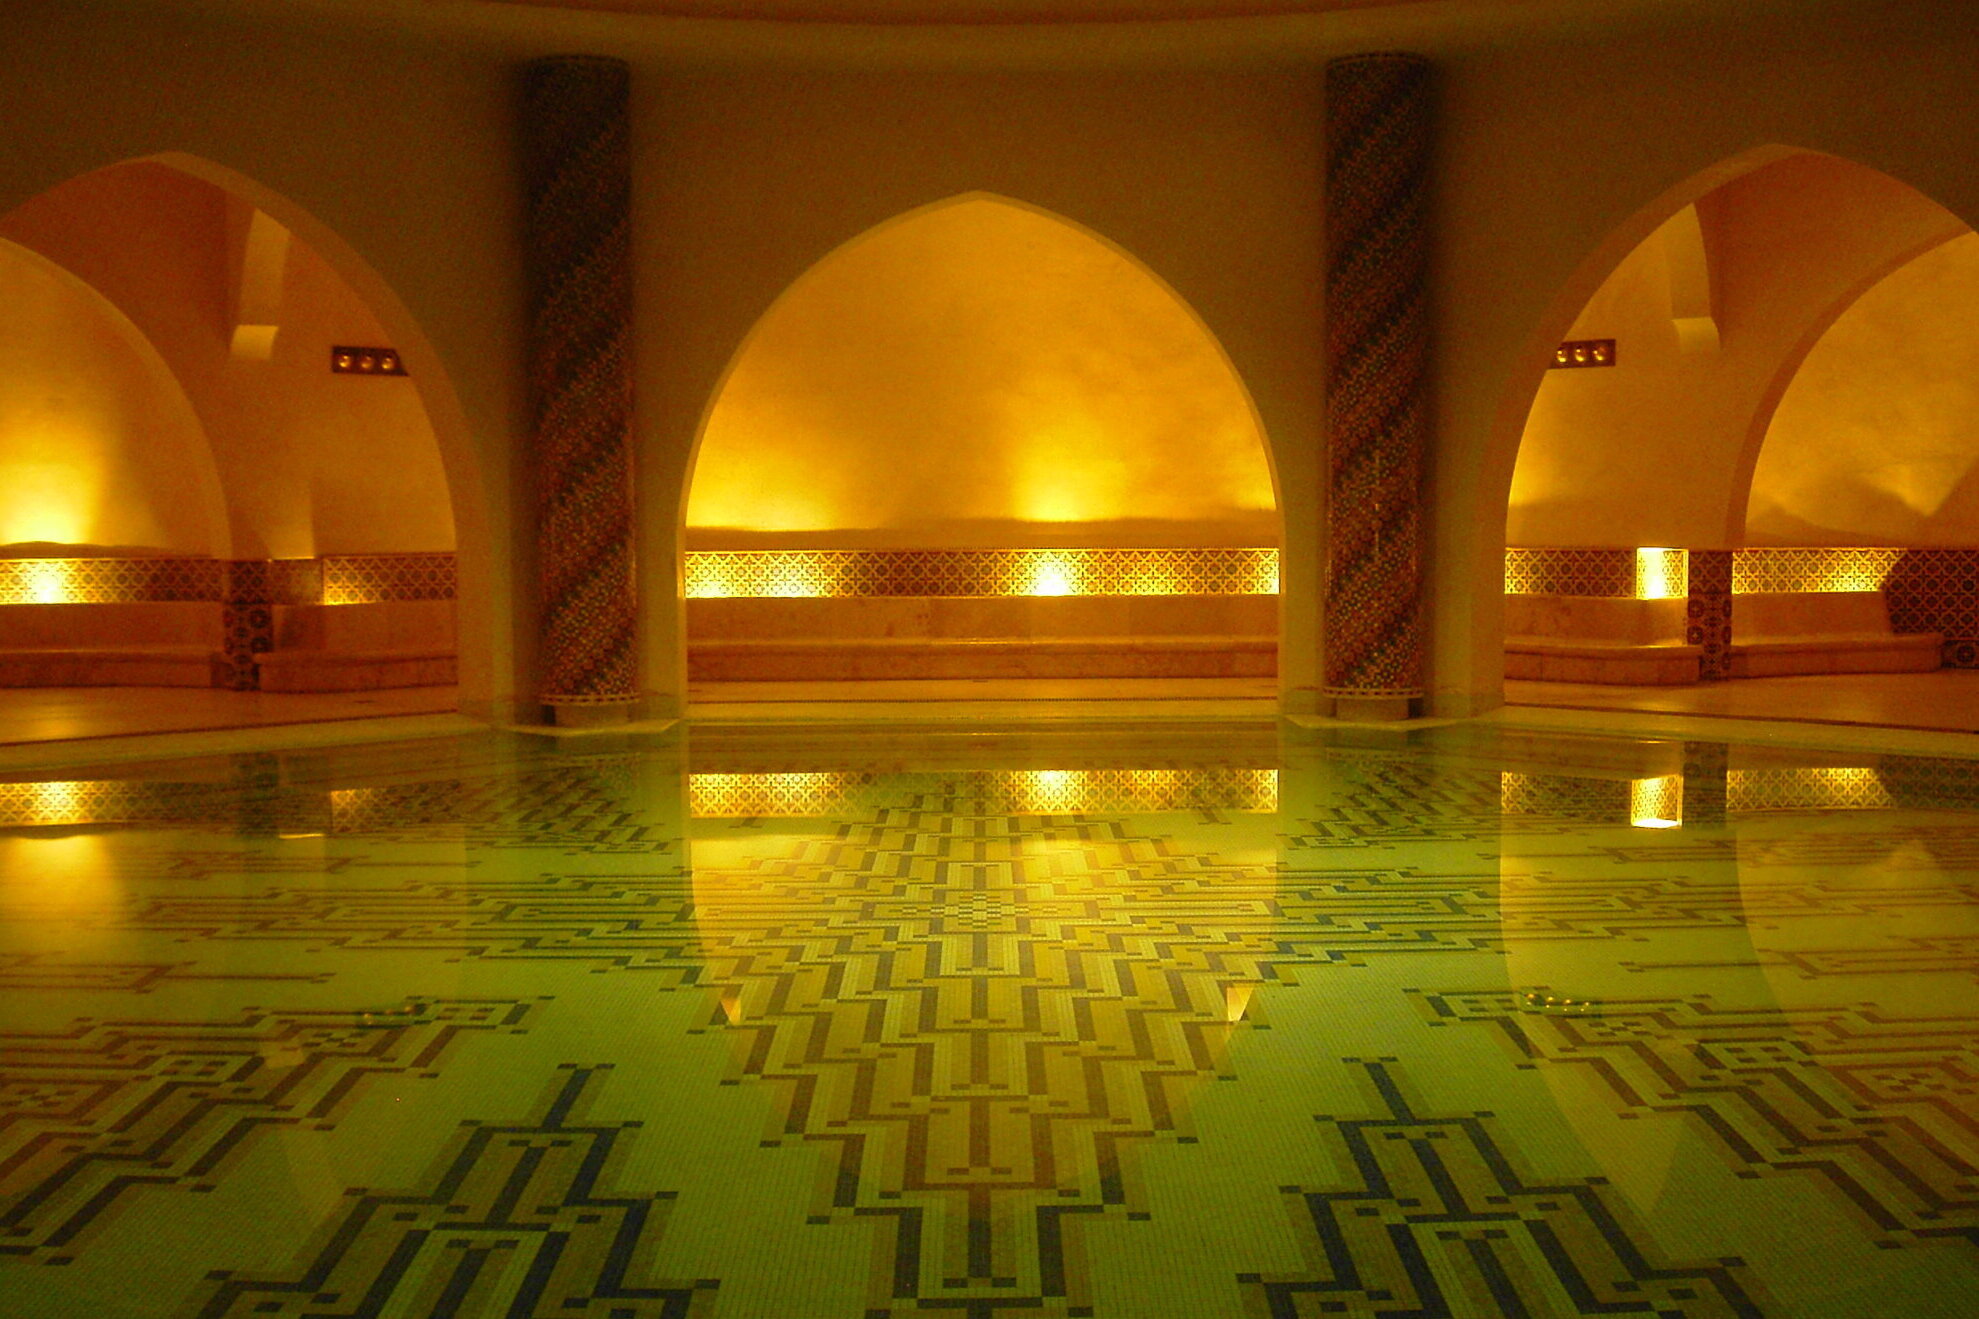 Indoor swimming pool with dimmed lights providing a cozy atmosphere